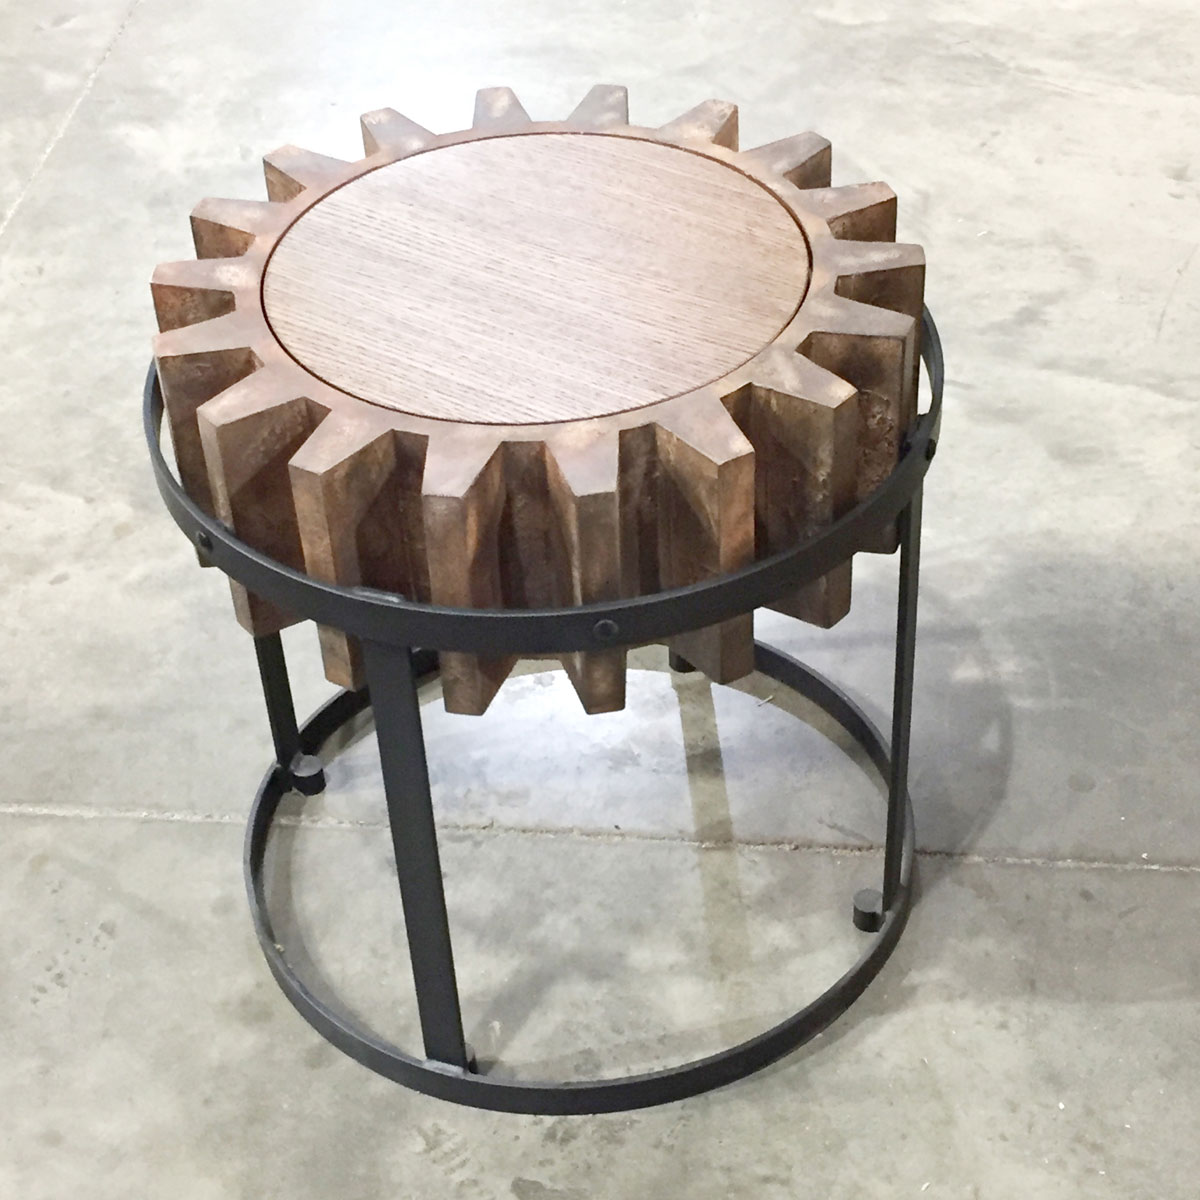 Hospitality furniture made in America - Gear Cog Table